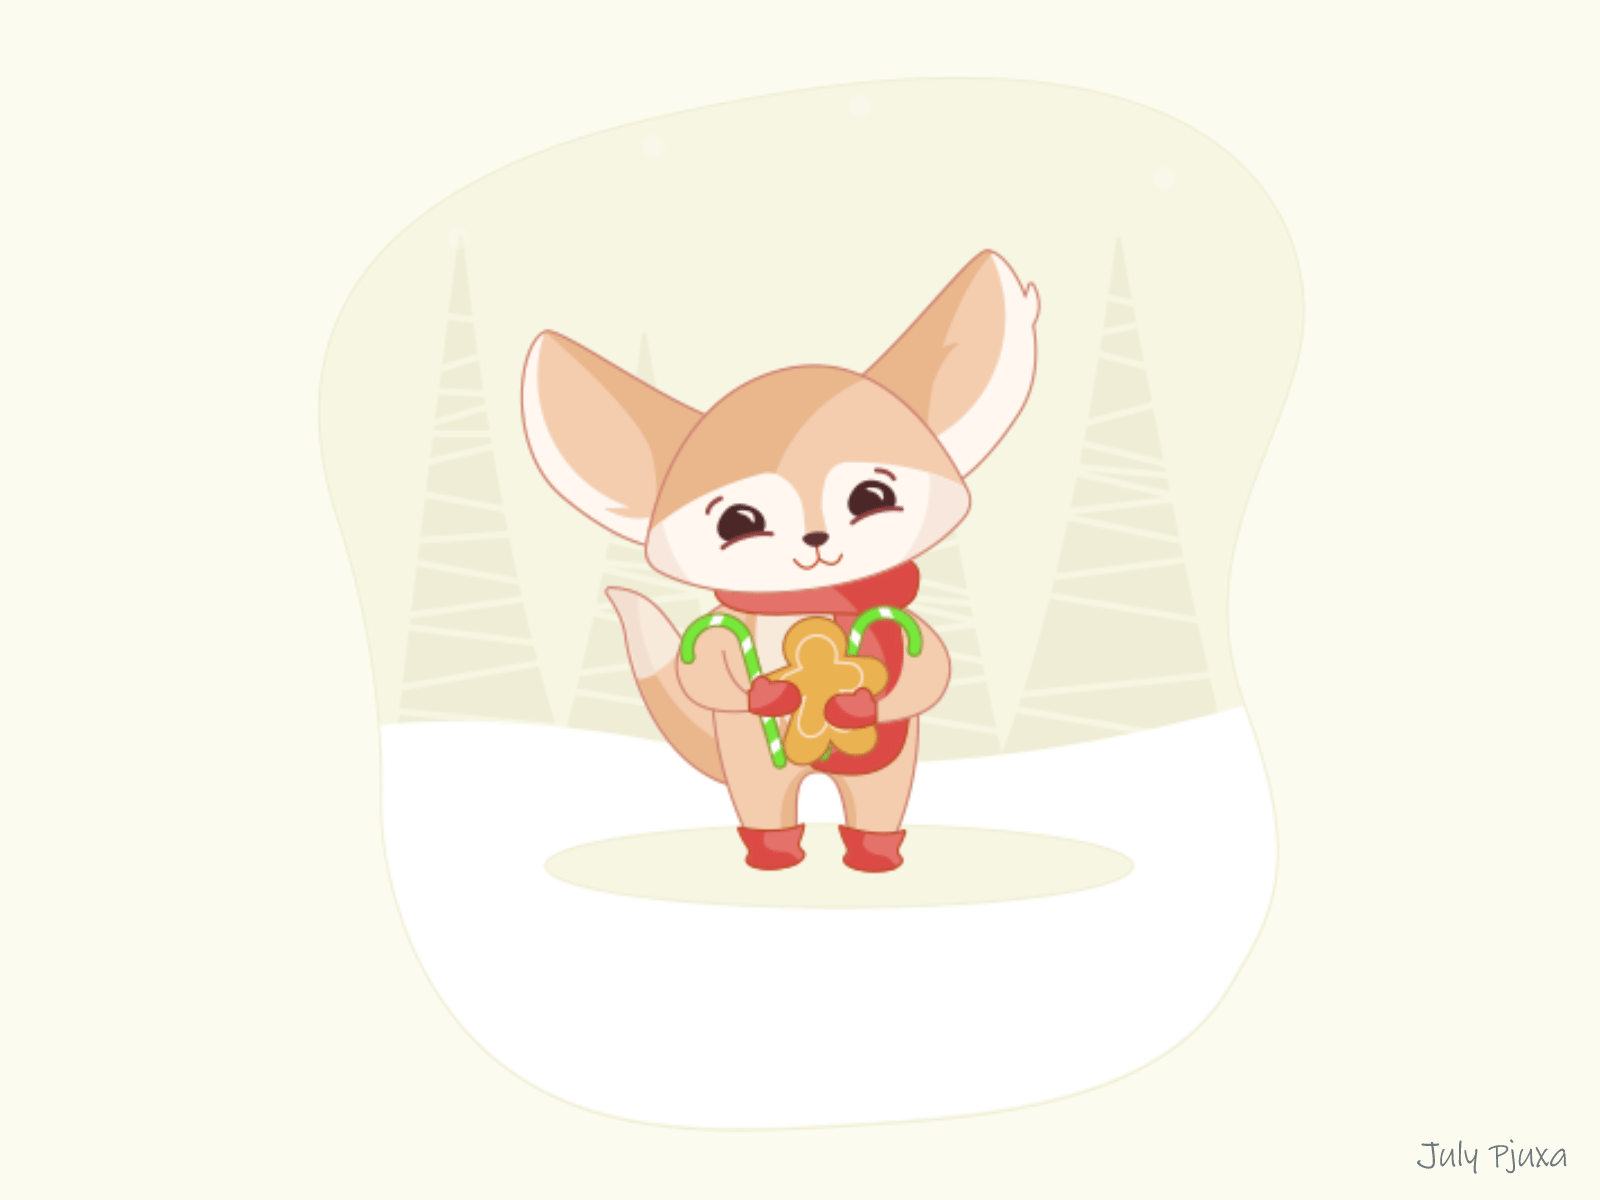 Christmas Fennec Fox: story 0.9 "Gingerbread" after effects animation charachter christmas fennec fennec fox gingerbread julypjuxa vector vector artwork